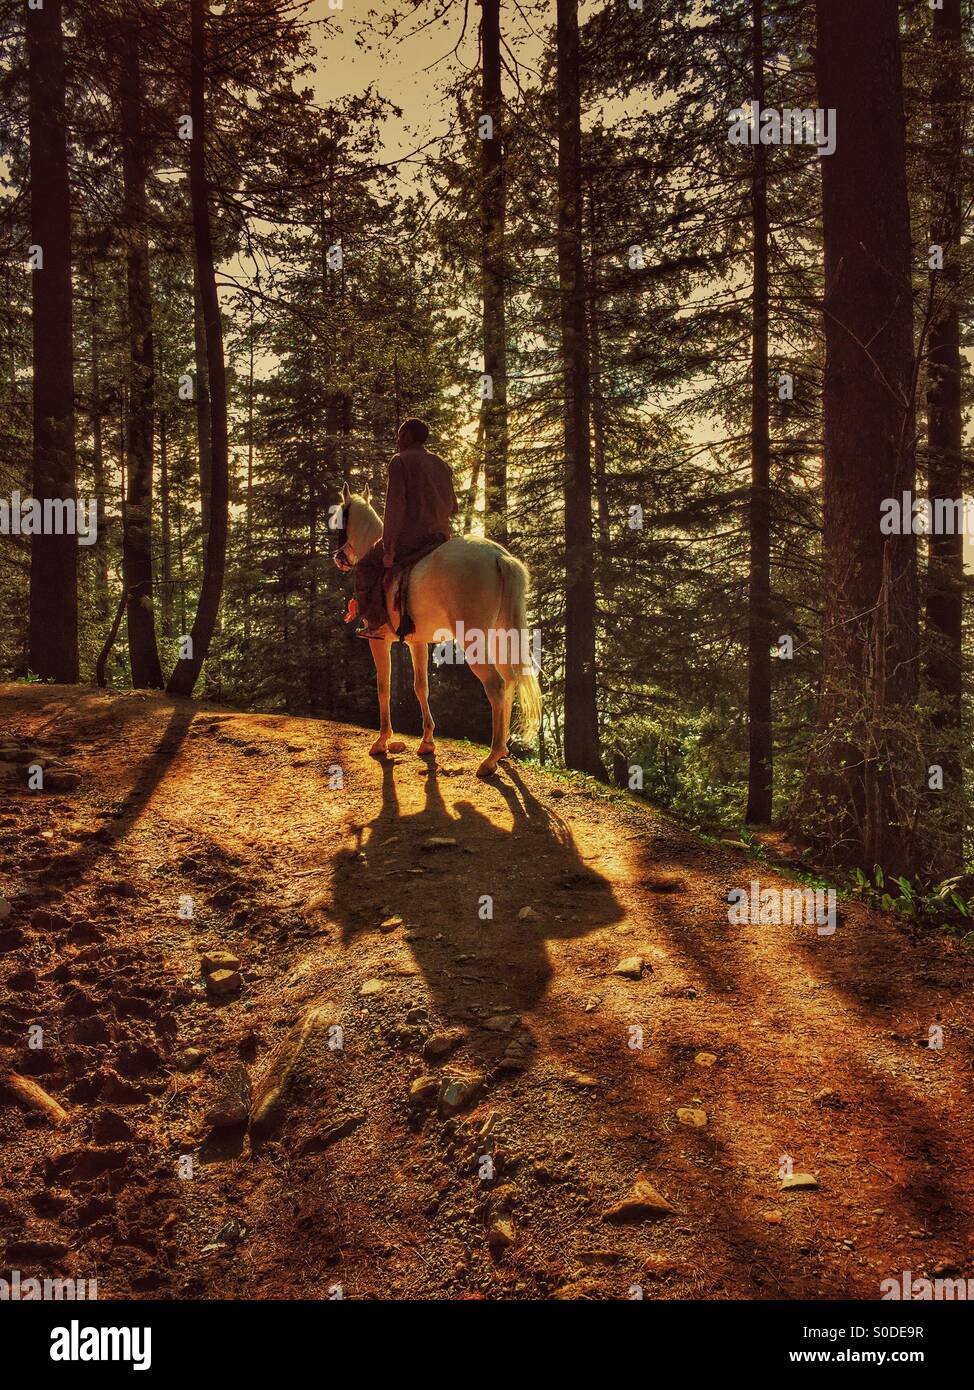 Man riding a white horse in the forest Stock Photo